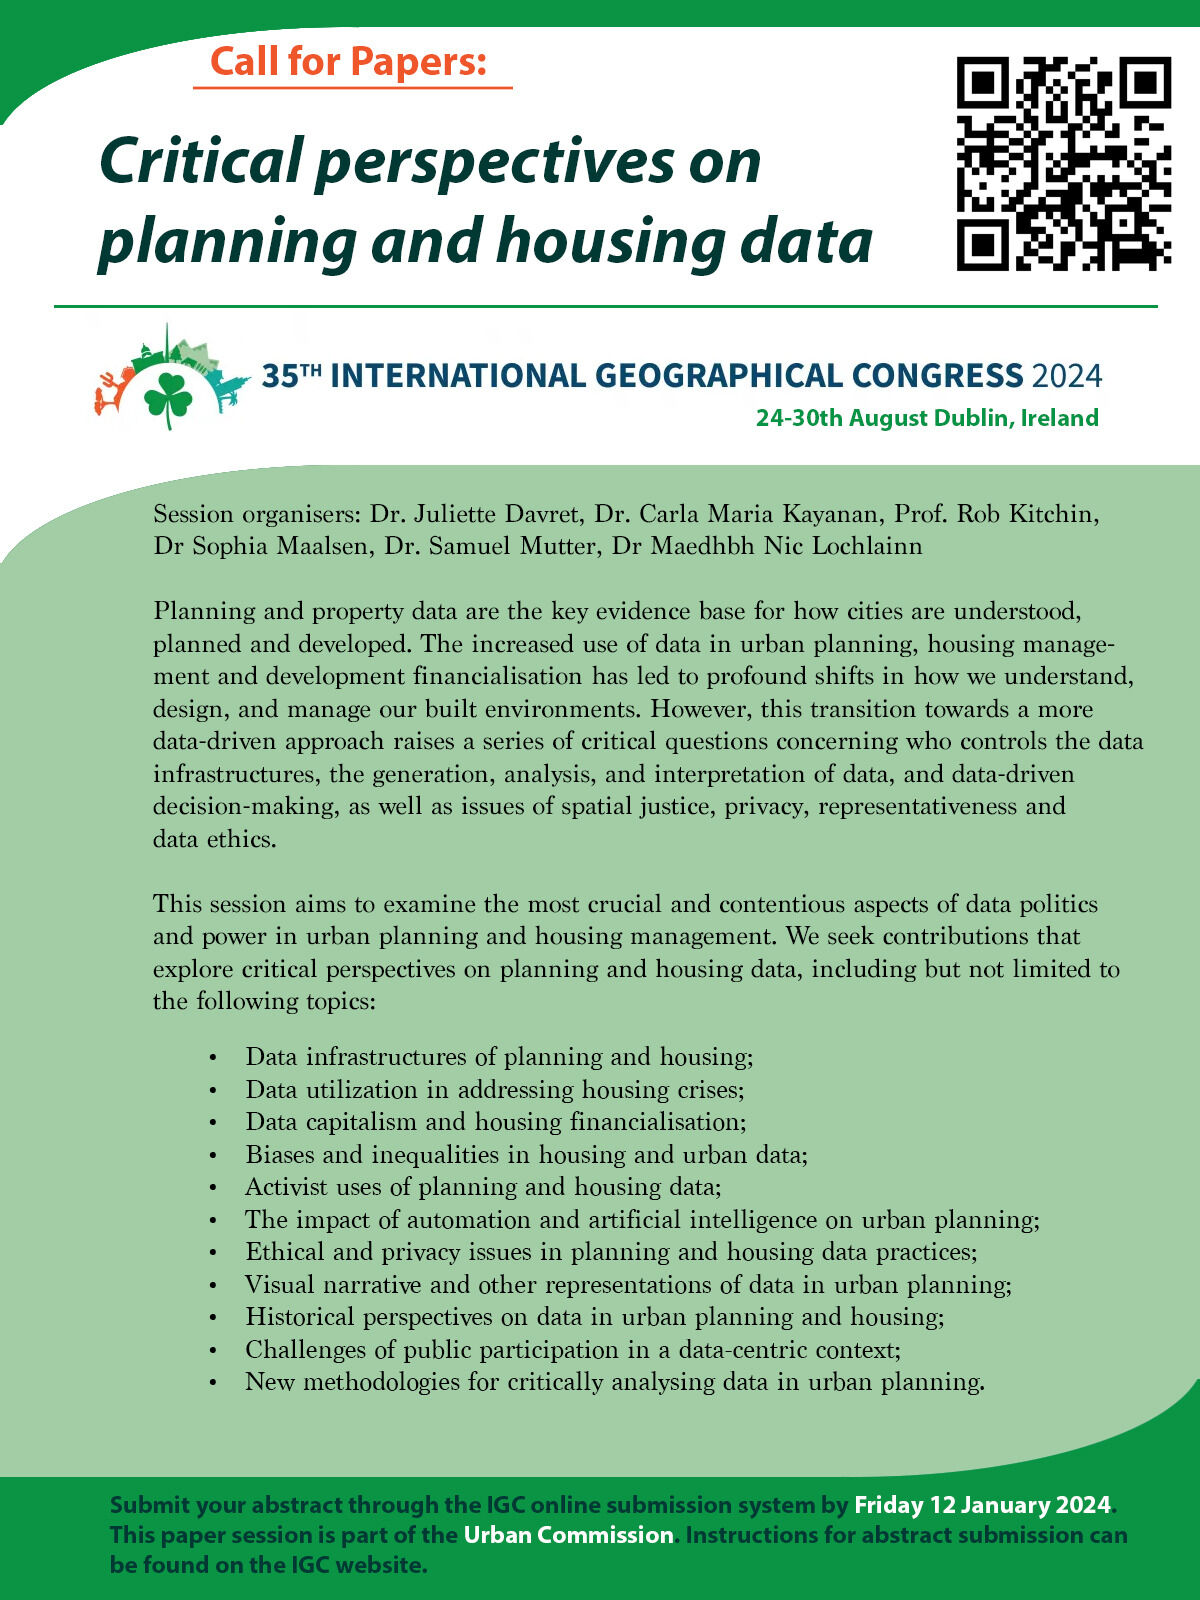 Critical Perspectives on Planning and Housing Data CFP Banner